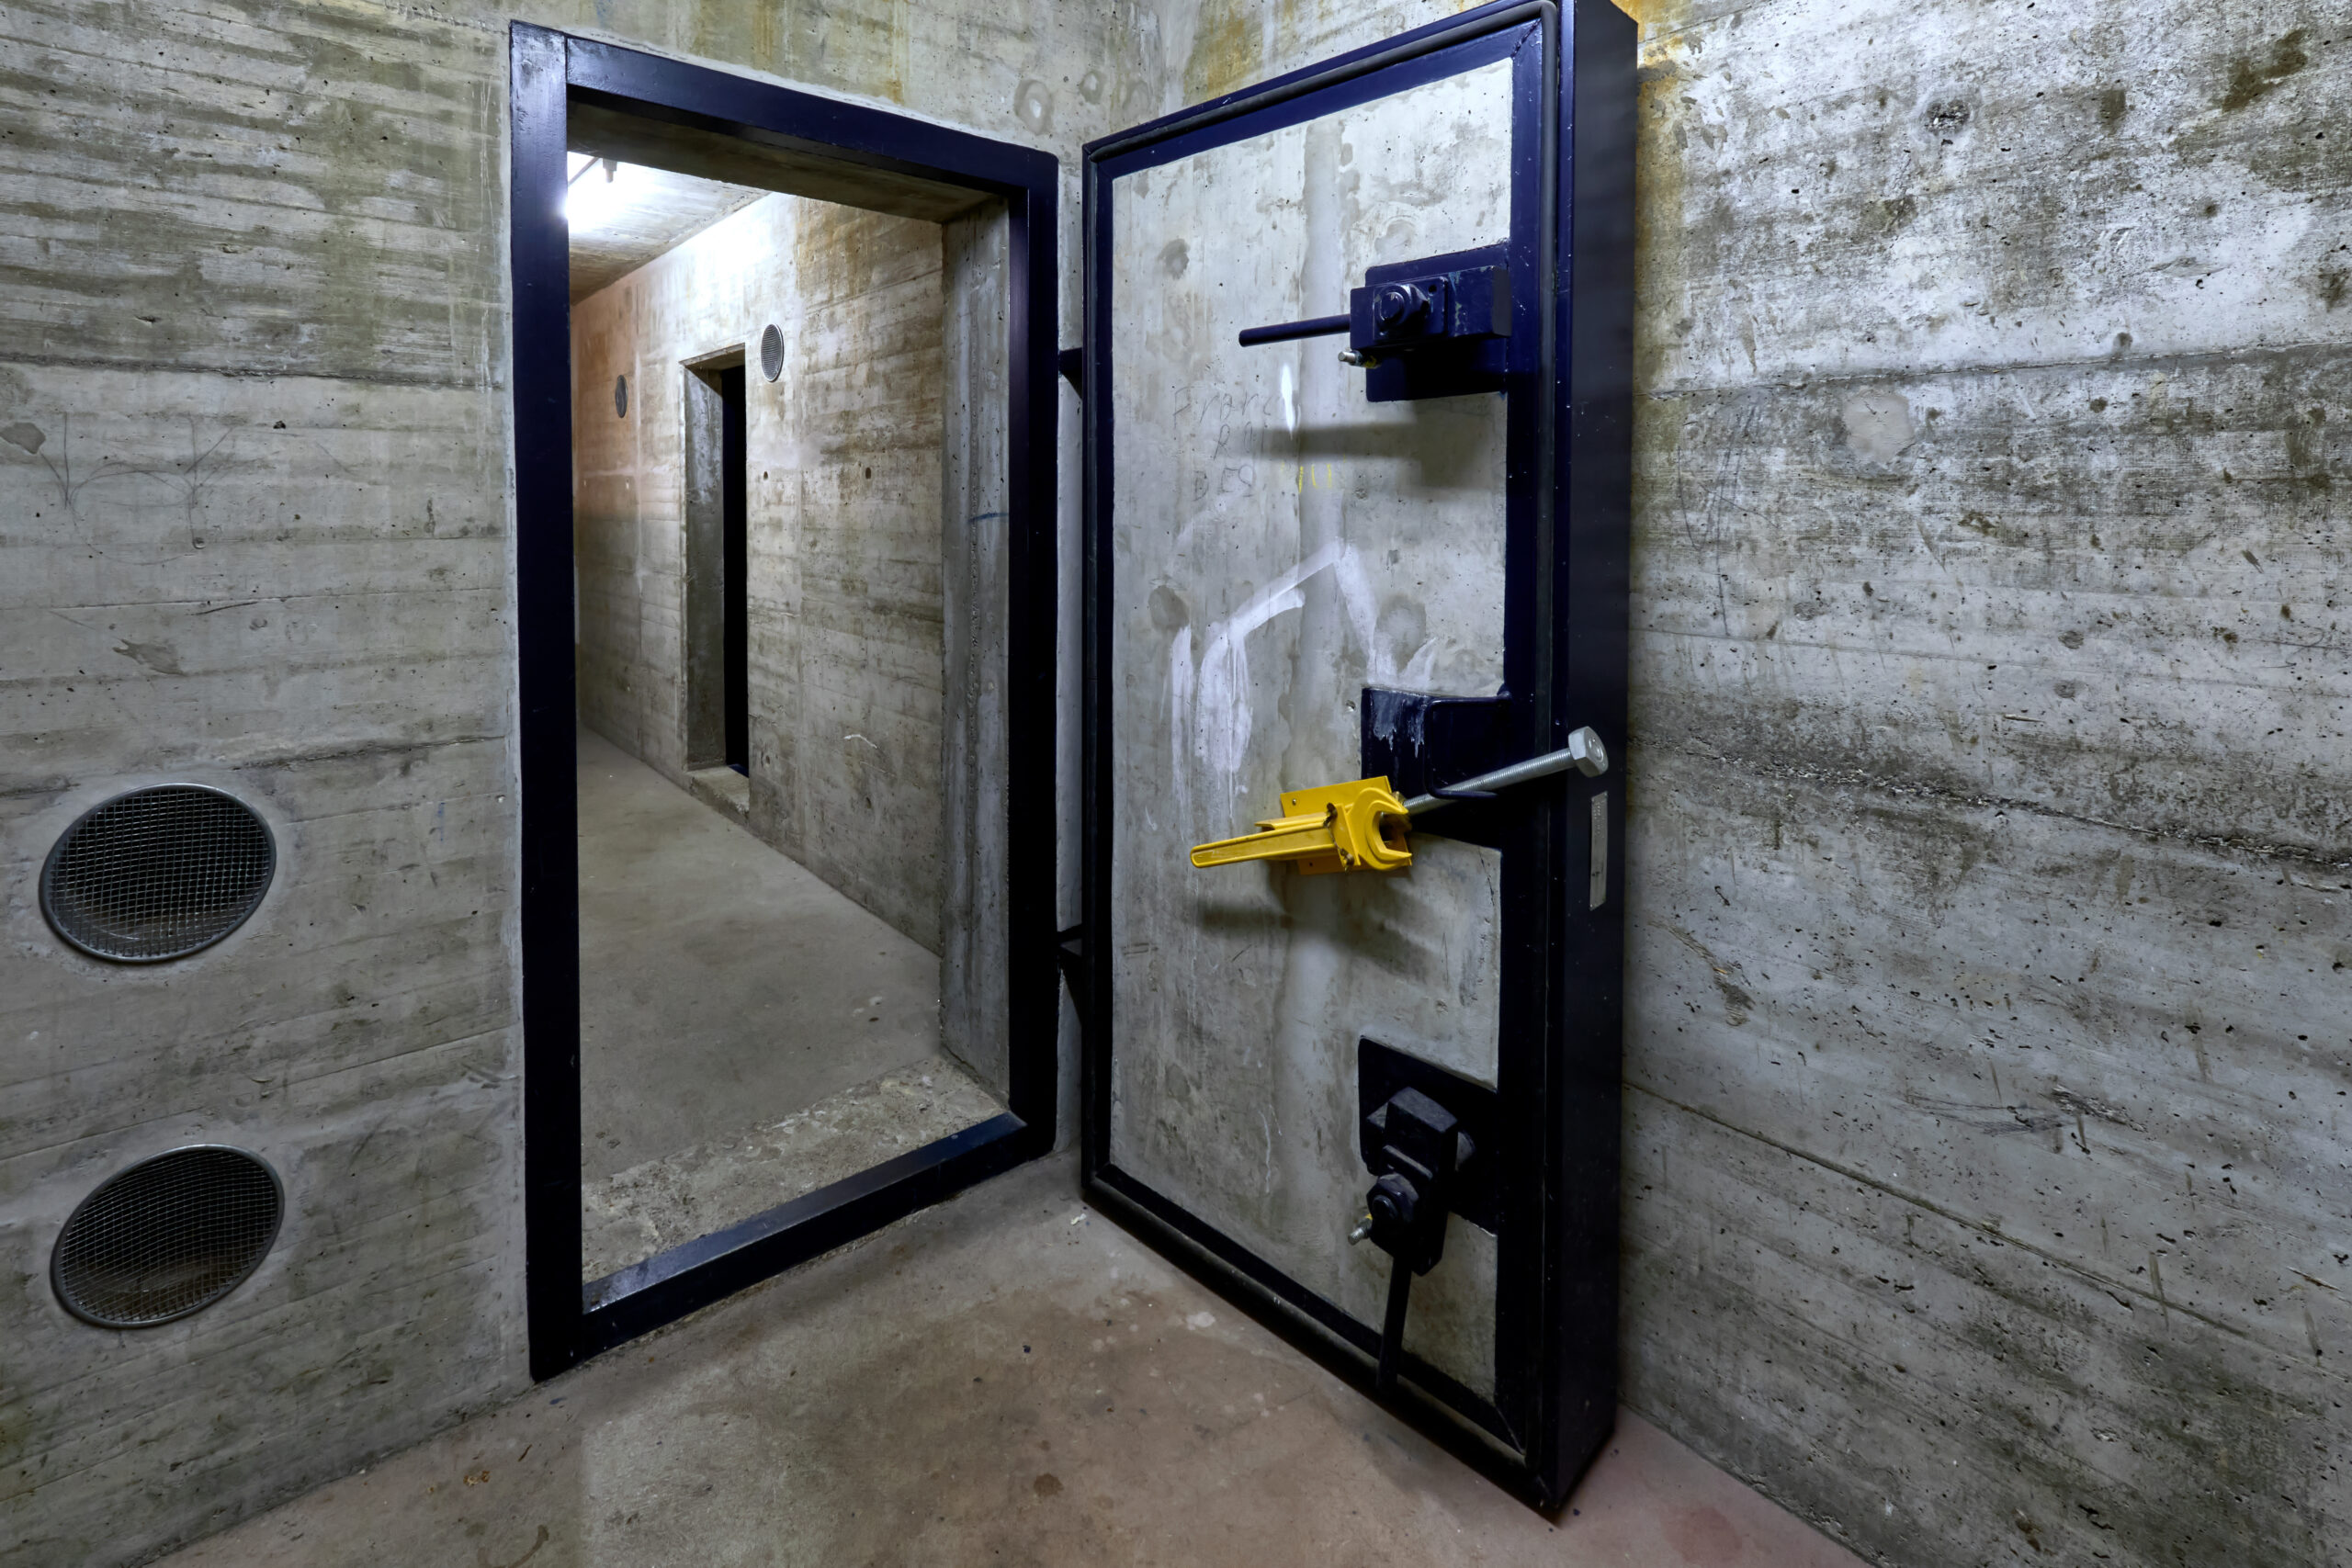 armored door of a public fallout shelter in an apartment building in Switzerland